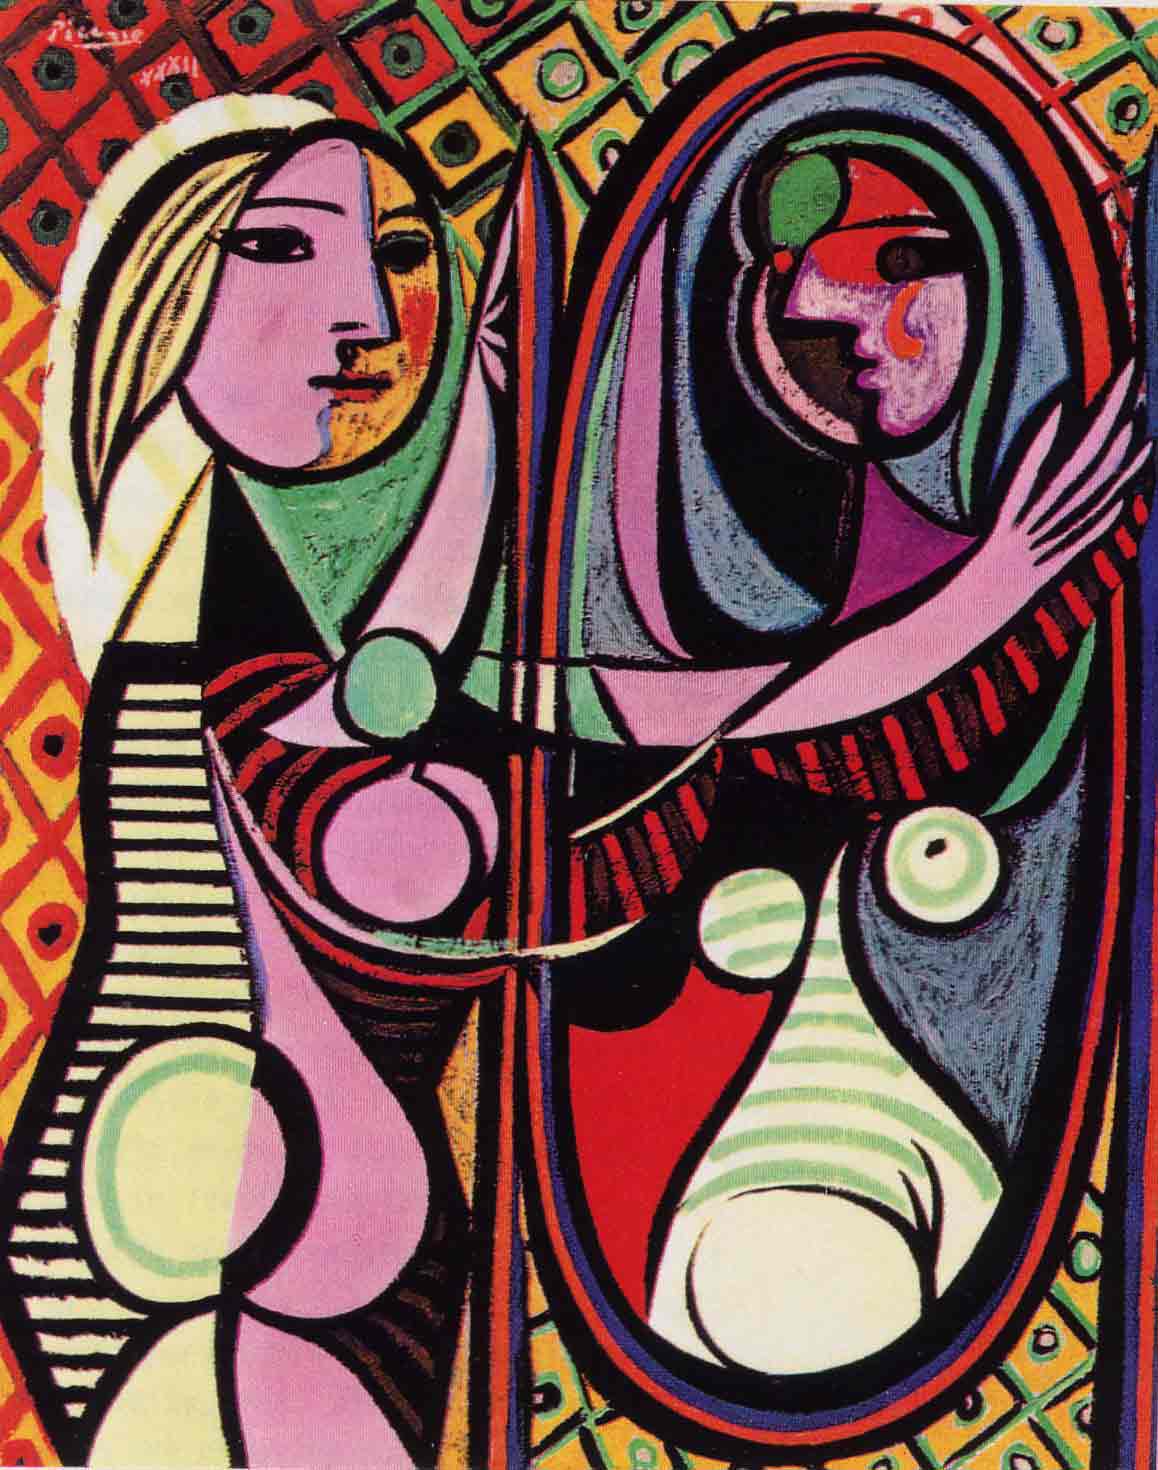 Picasso's painting, "Girl Before a Mirror", 1932